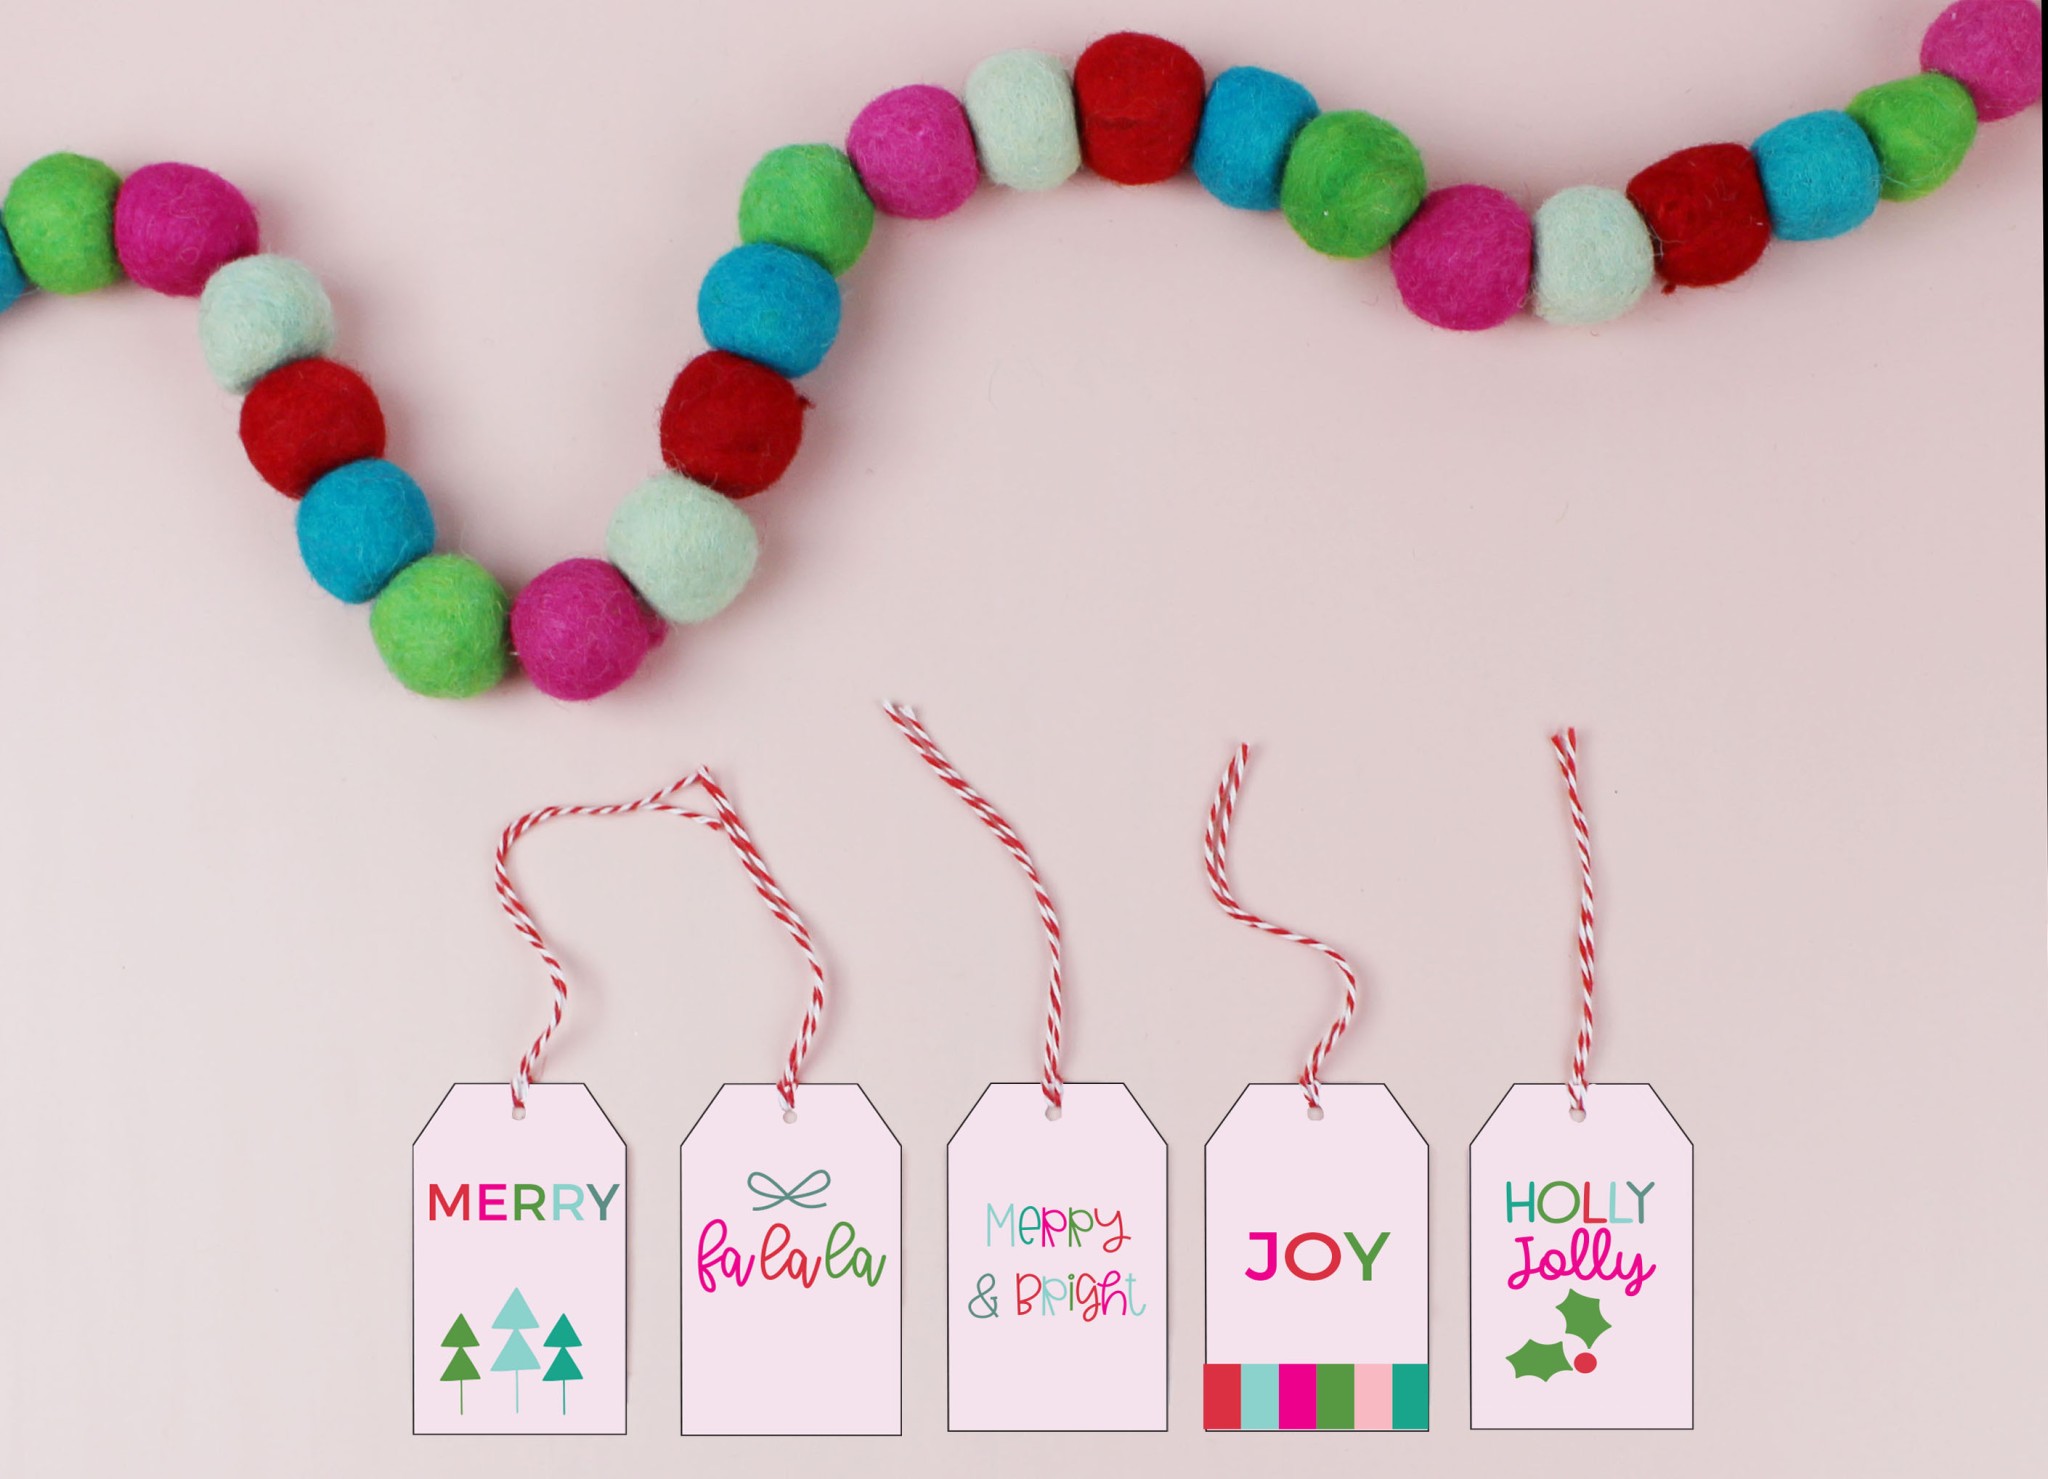 https://brooklynberrydesigns.com/wp-content/uploads/2019/12/Snowflakes-Gift-Tags-2-scaled.jpg